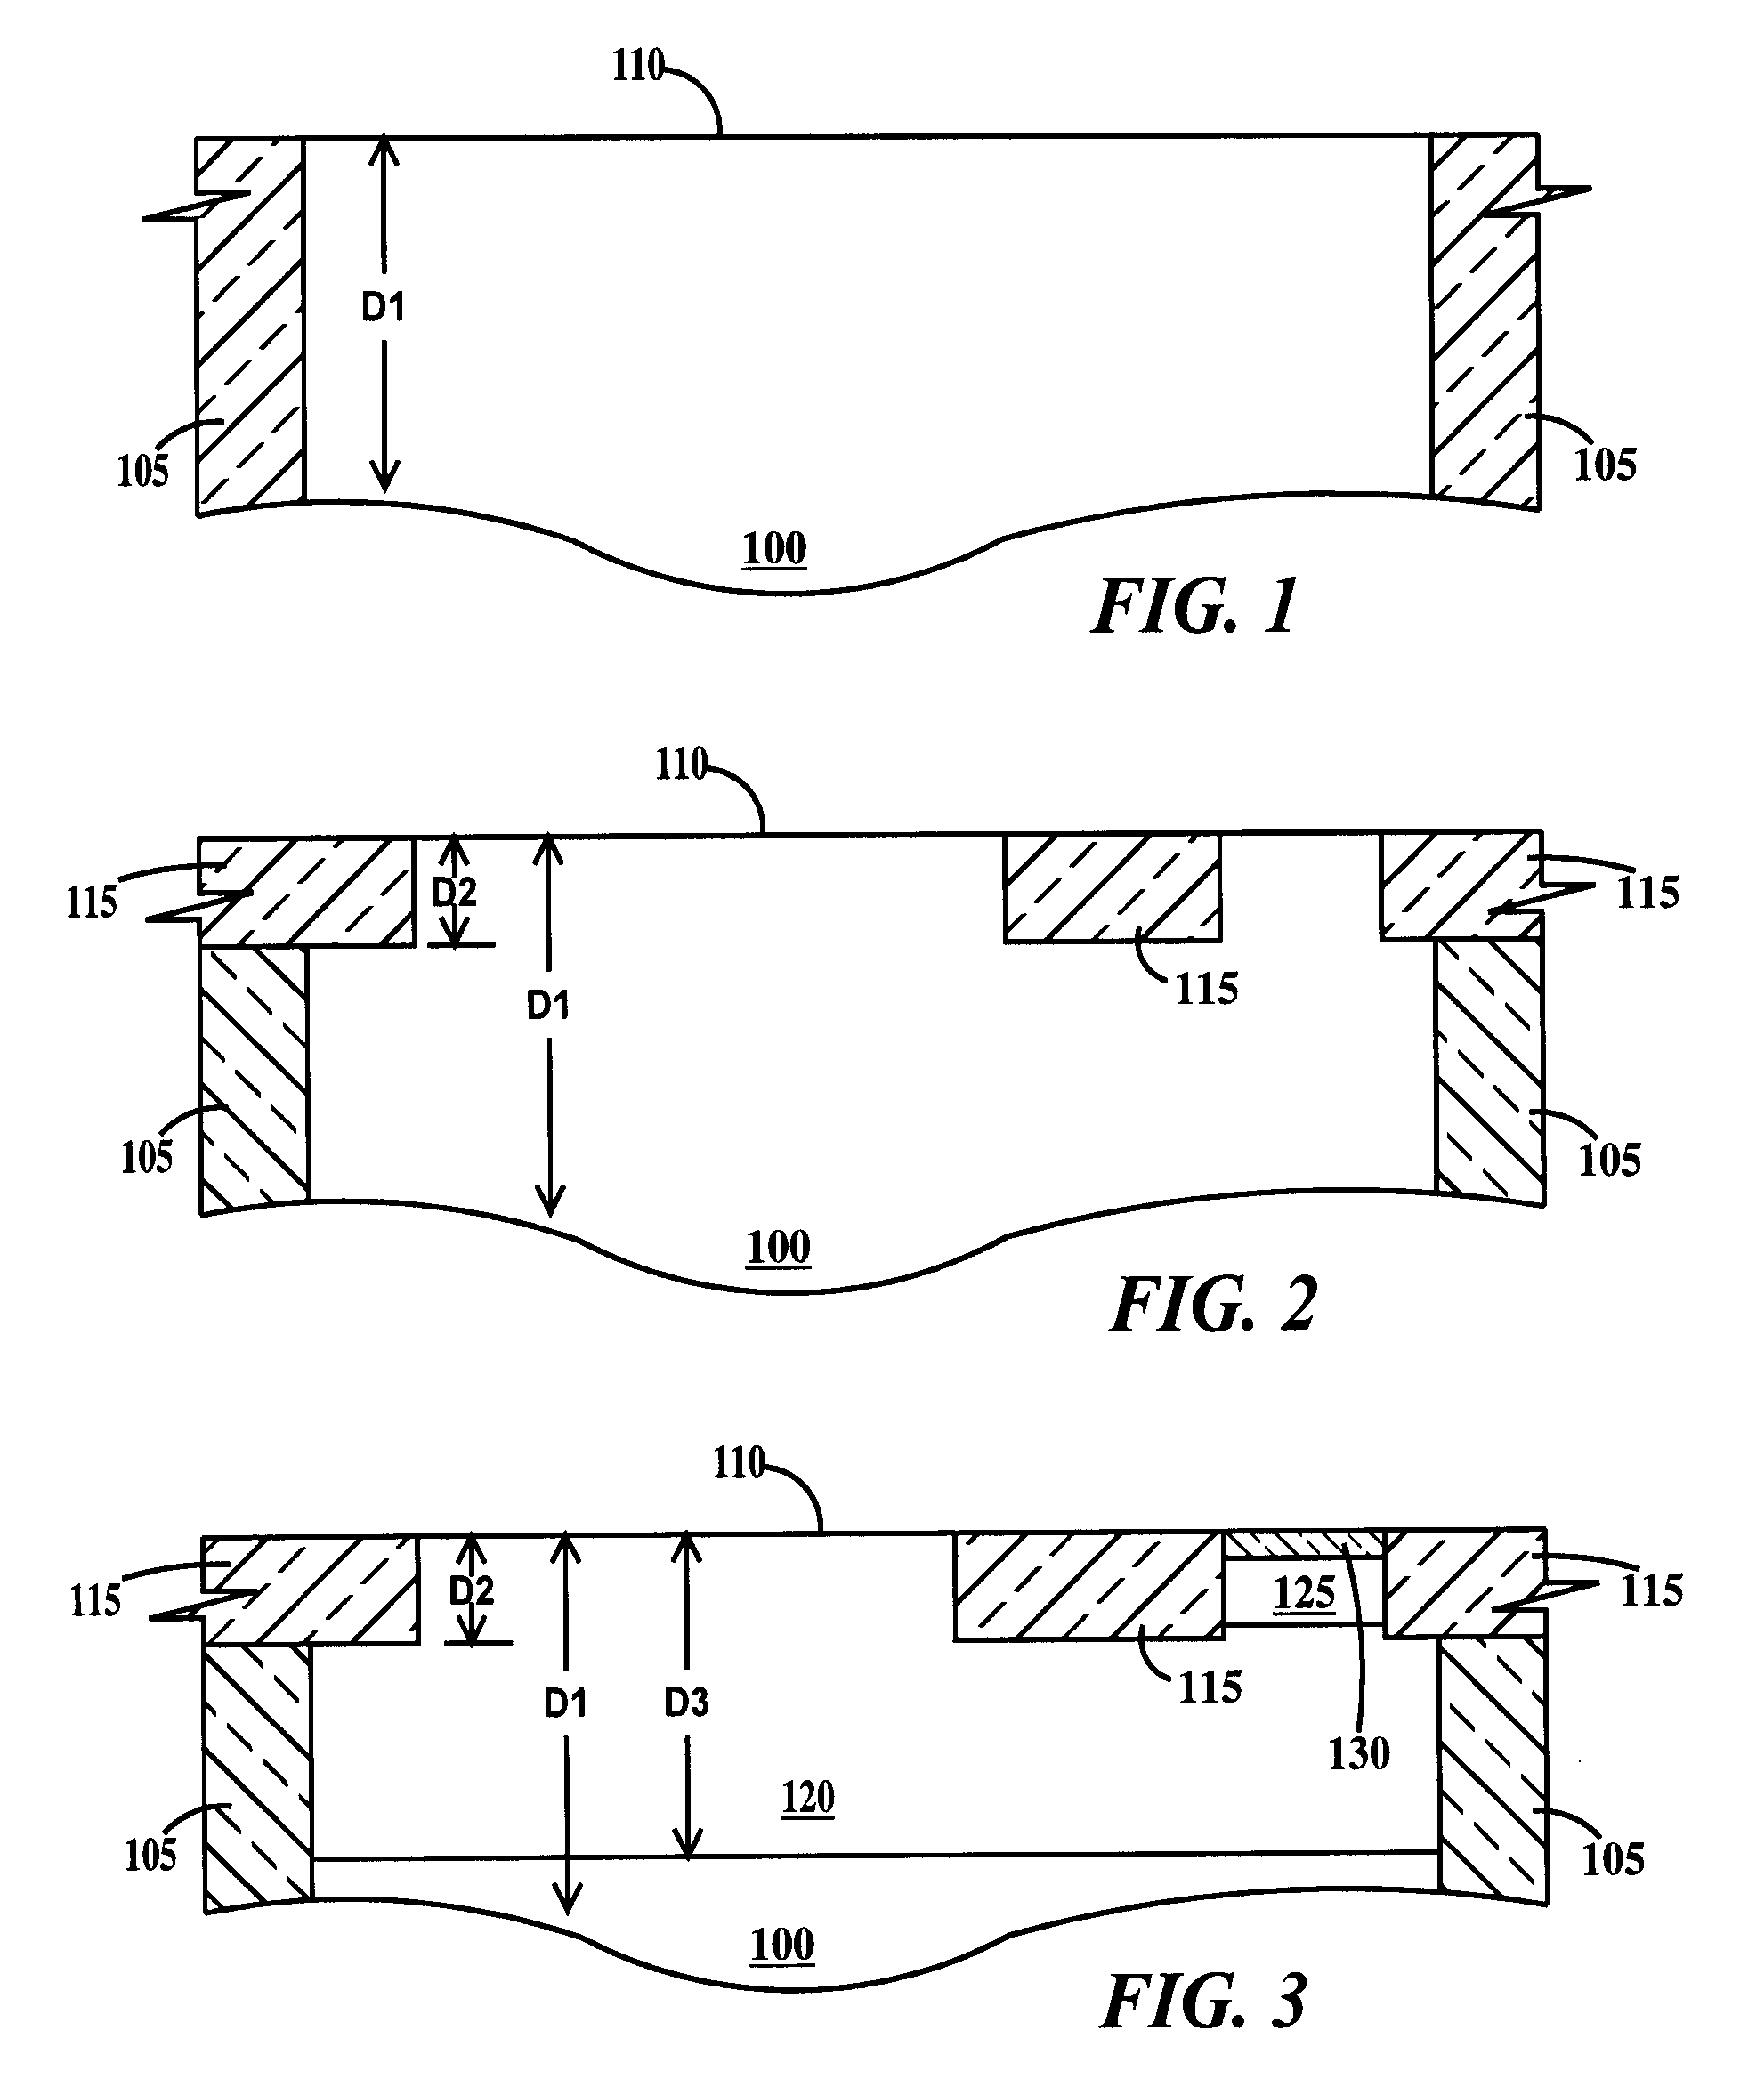 Selective links in silicon hetero-junction bipolar transistors using carbon doping and method of forming same